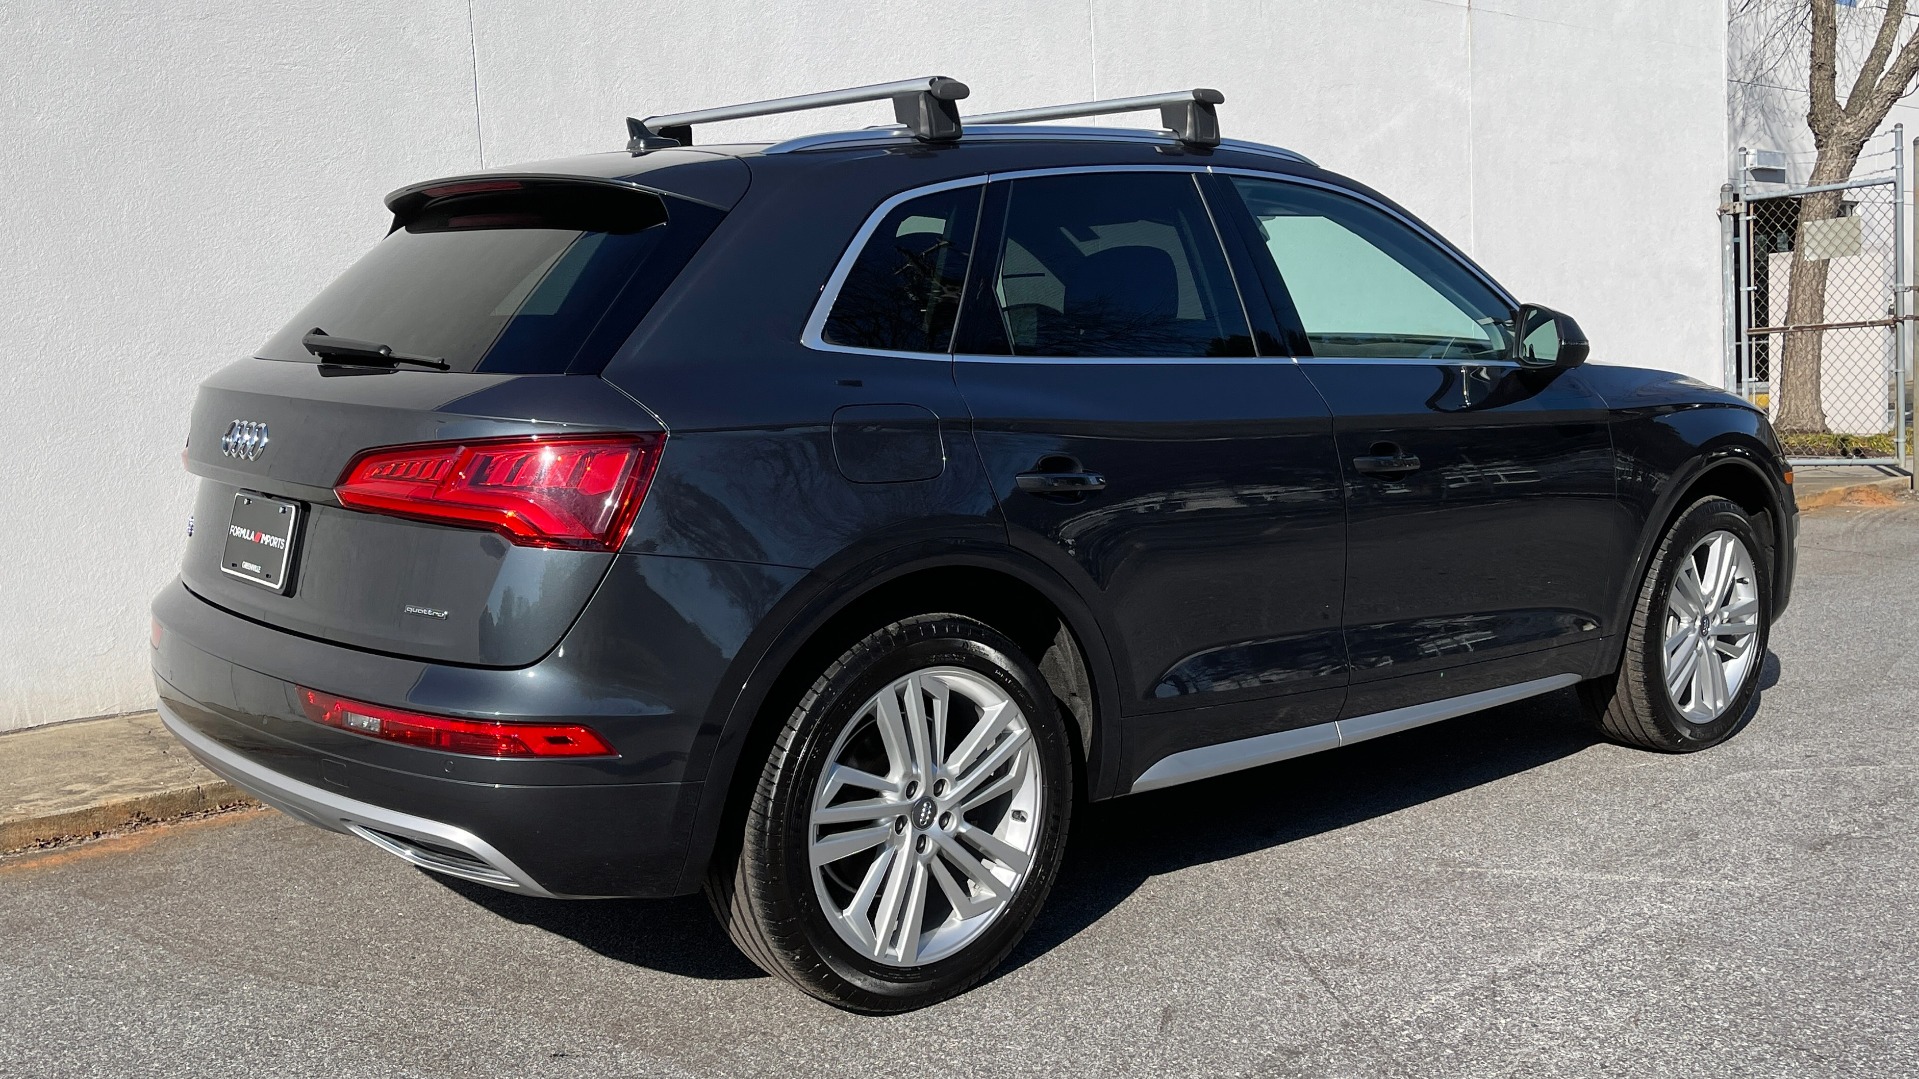 Used 2019 Audi Q5 PREMIUM PLUS / NAV / SUNROOF / WARM WTHR / PARK SYS PLUS / REARVIEW for sale $40,495 at Formula Imports in Charlotte NC 28227 7